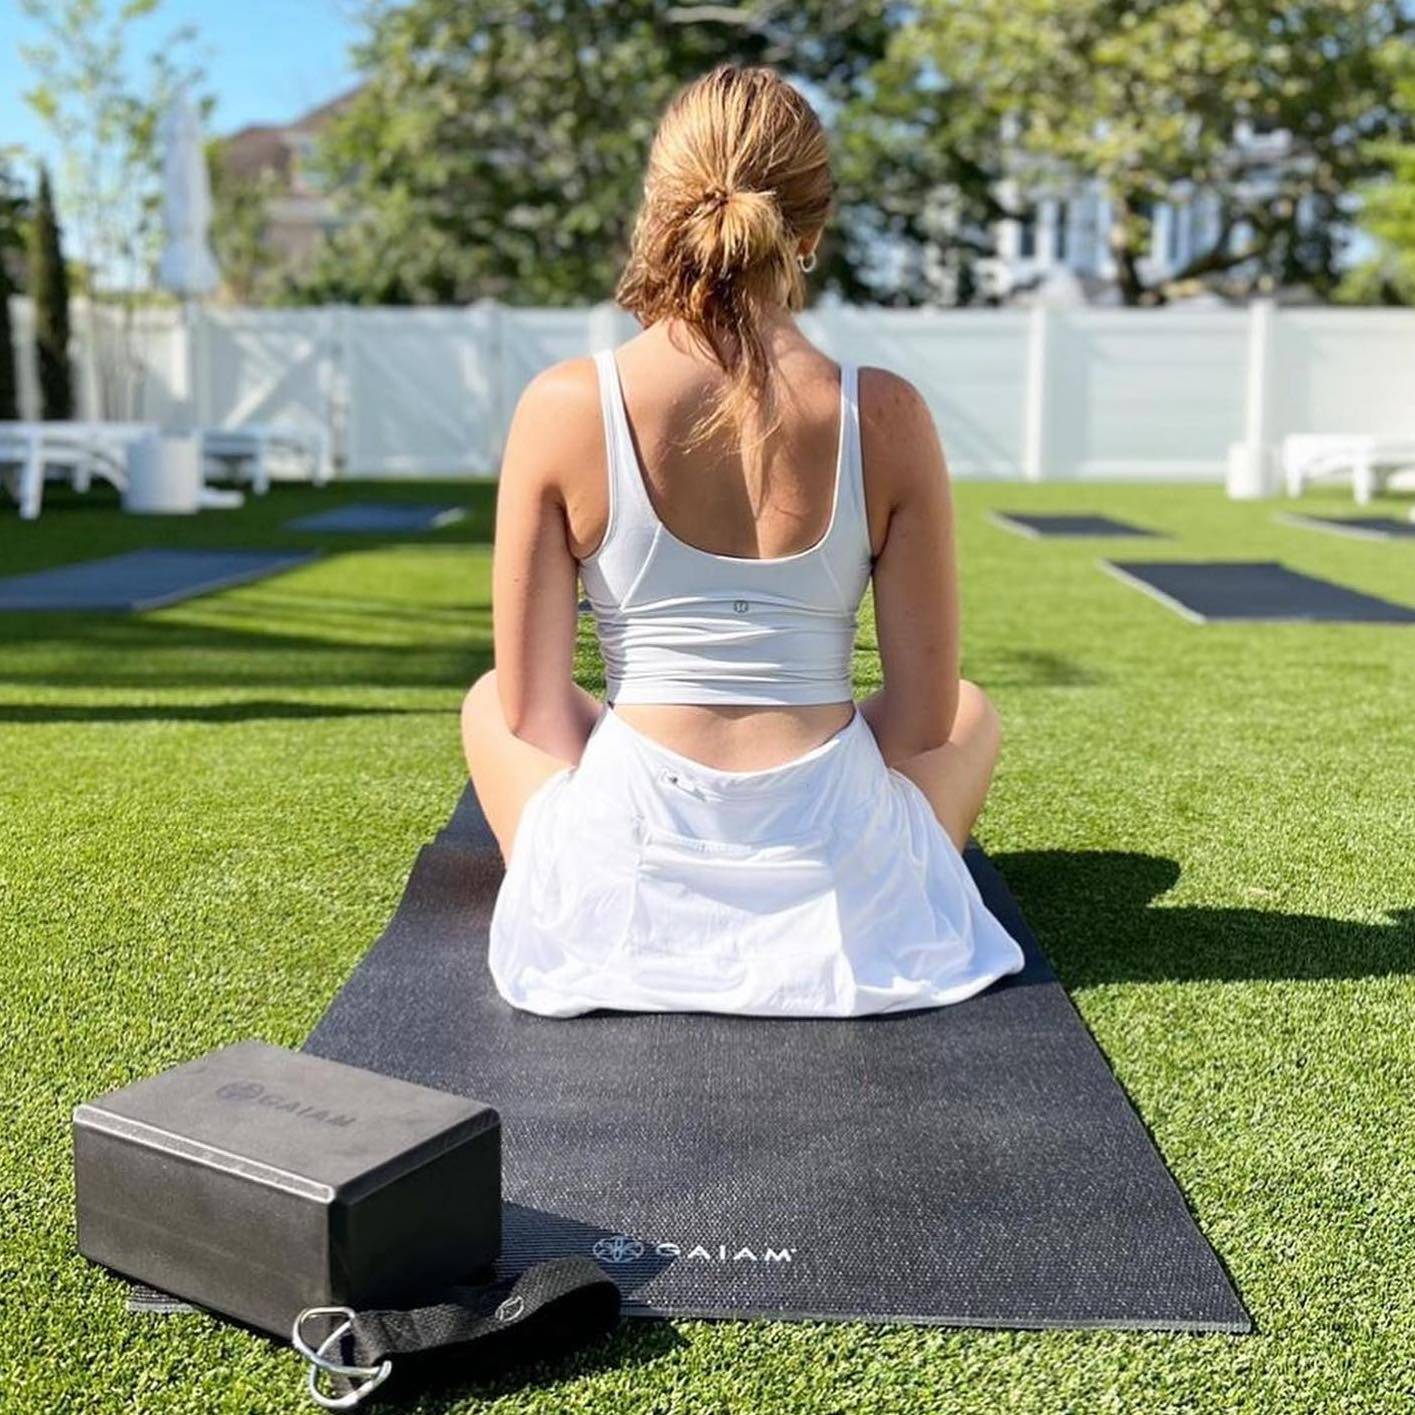 Gaiam - Breathing in peace, exhaling strength. ✨ #ForEveryBody #YogaApparel  #ActiveWear #WorkoutApparel #Zen #YogaLife #Yogi #Mindfulness #YogaEveryday  #InnerPeace #FitnessClothes #FitnessWear